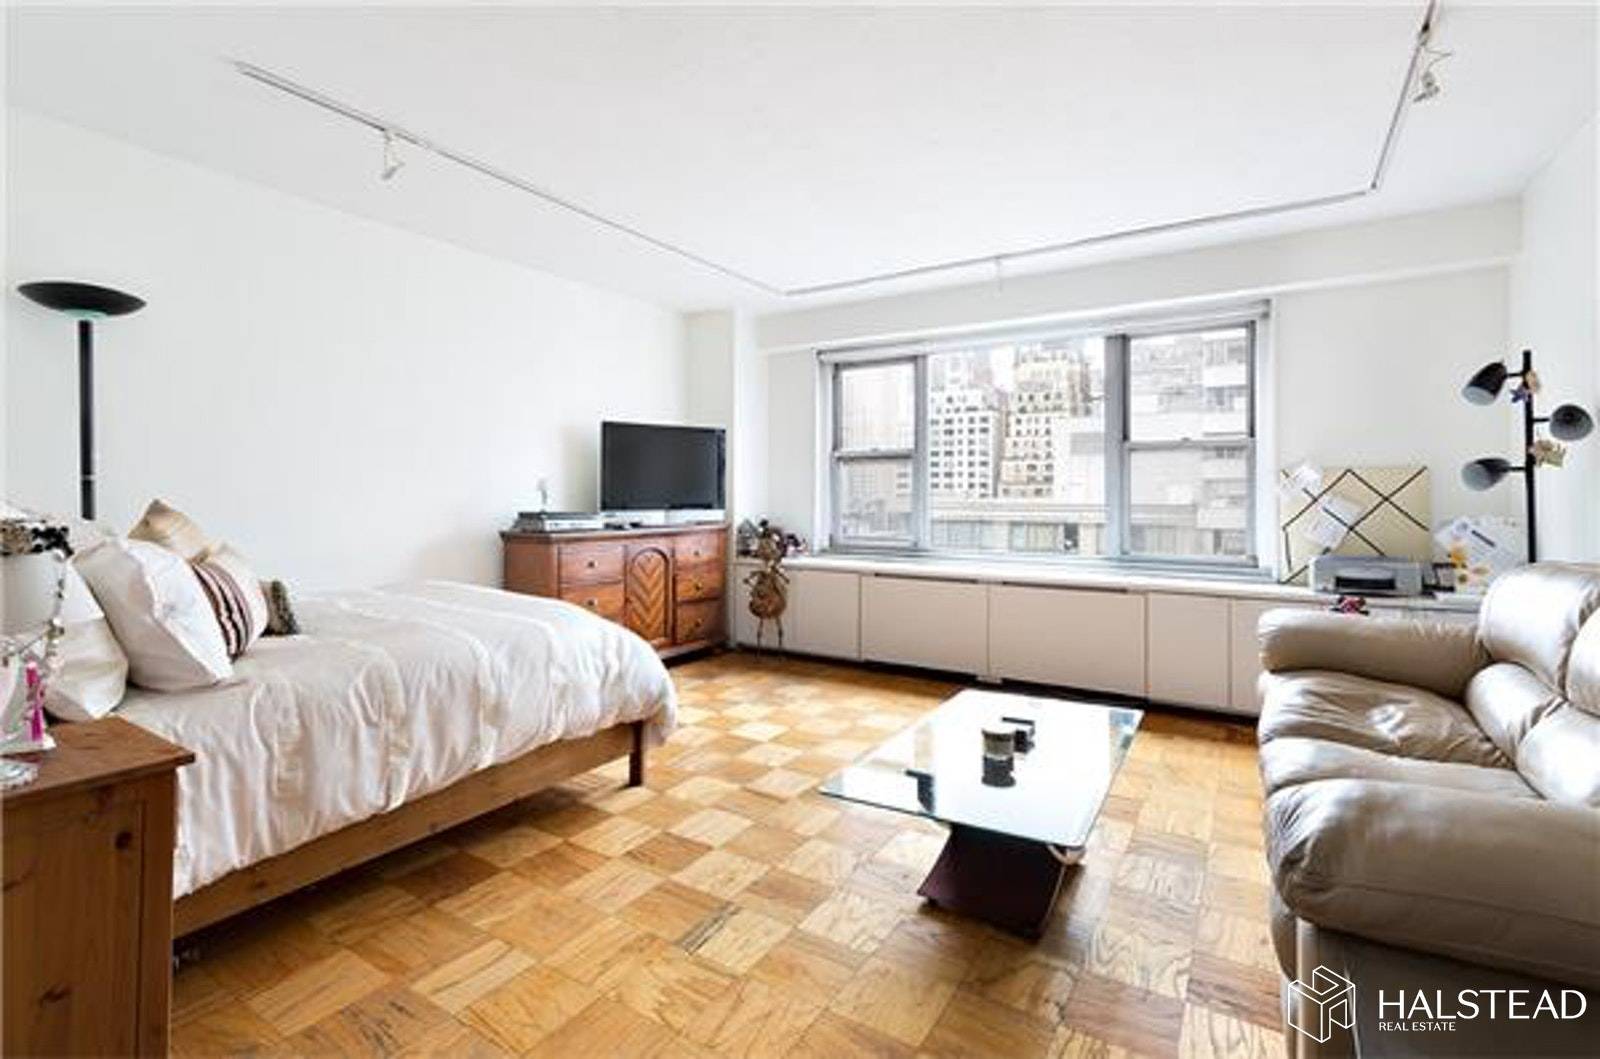 Spacious open view alcove studio in full service condo building on a tree lined block in one of the most coveted Upper East Side neighborhoods.